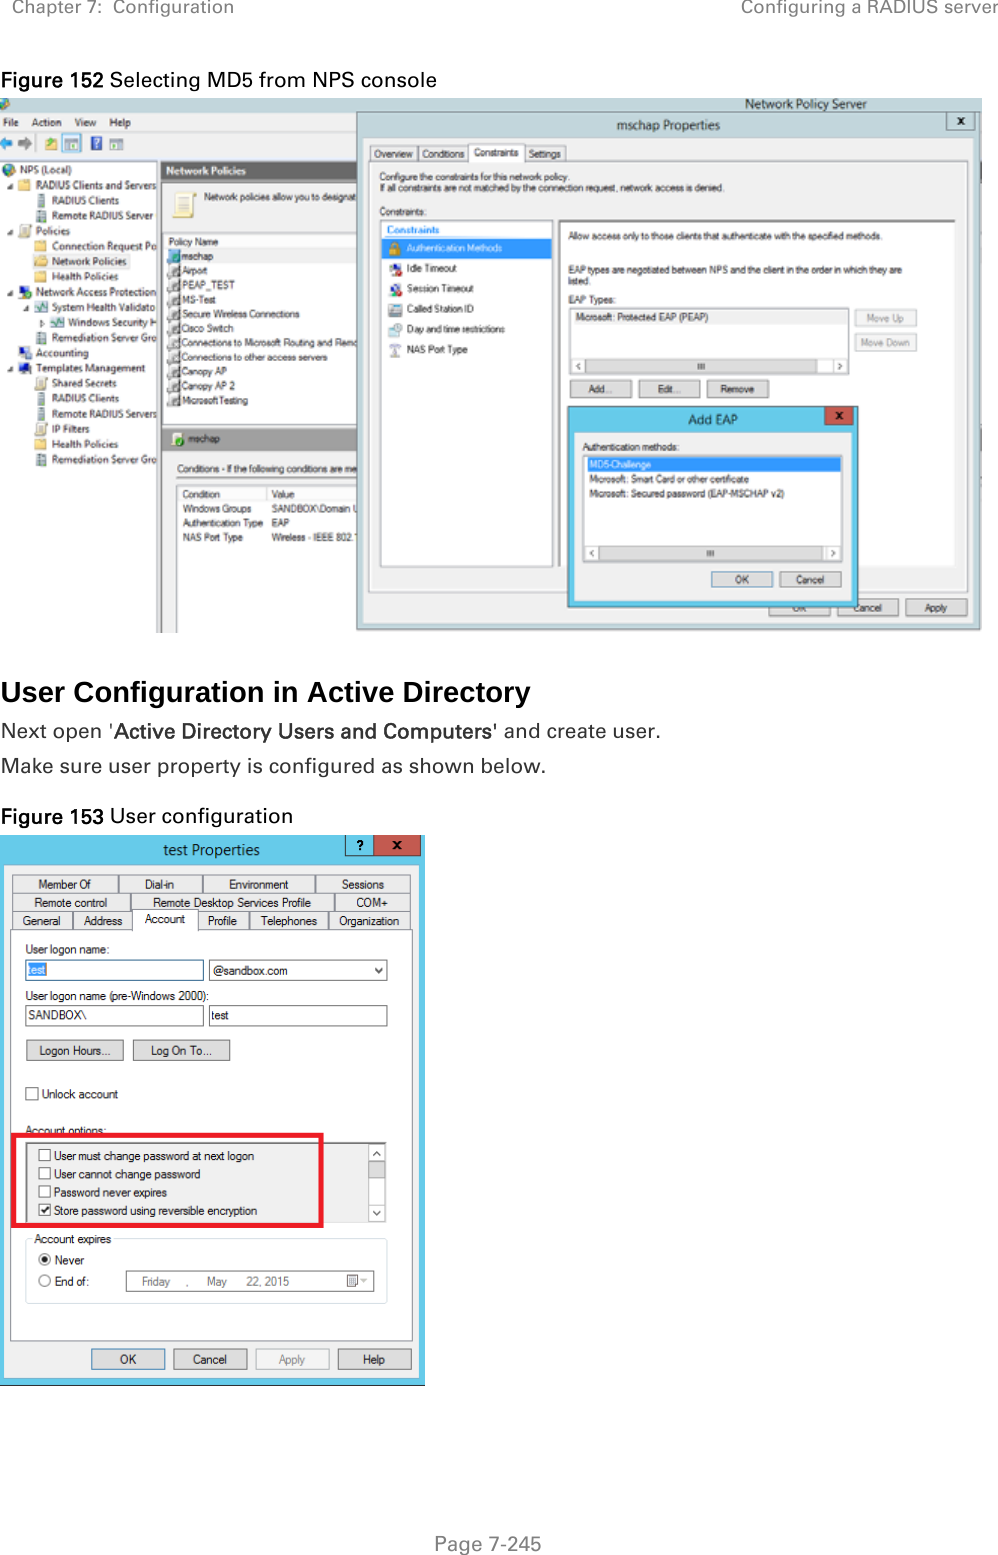 Chapter 7:  Configuration  Configuring a RADIUS server   Page 7-245 Figure 152 Selecting MD5 from NPS console   User Configuration in Active Directory Next open &apos;Active Directory Users and Computers&apos; and create user. Make sure user property is configured as shown below. Figure 153 User configuration    